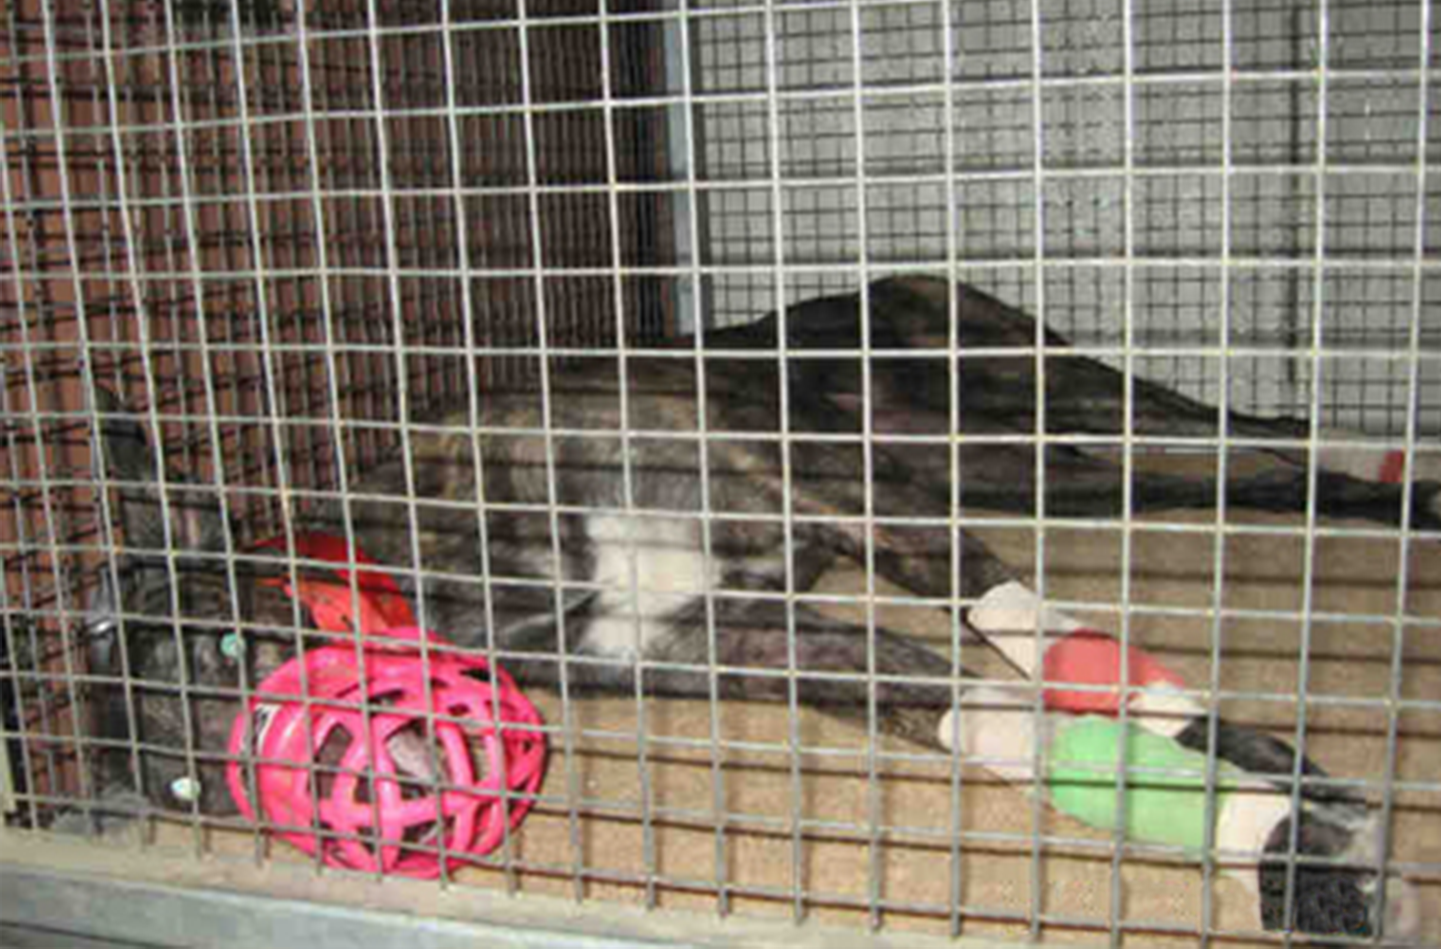 Injured greyhounds in a cage